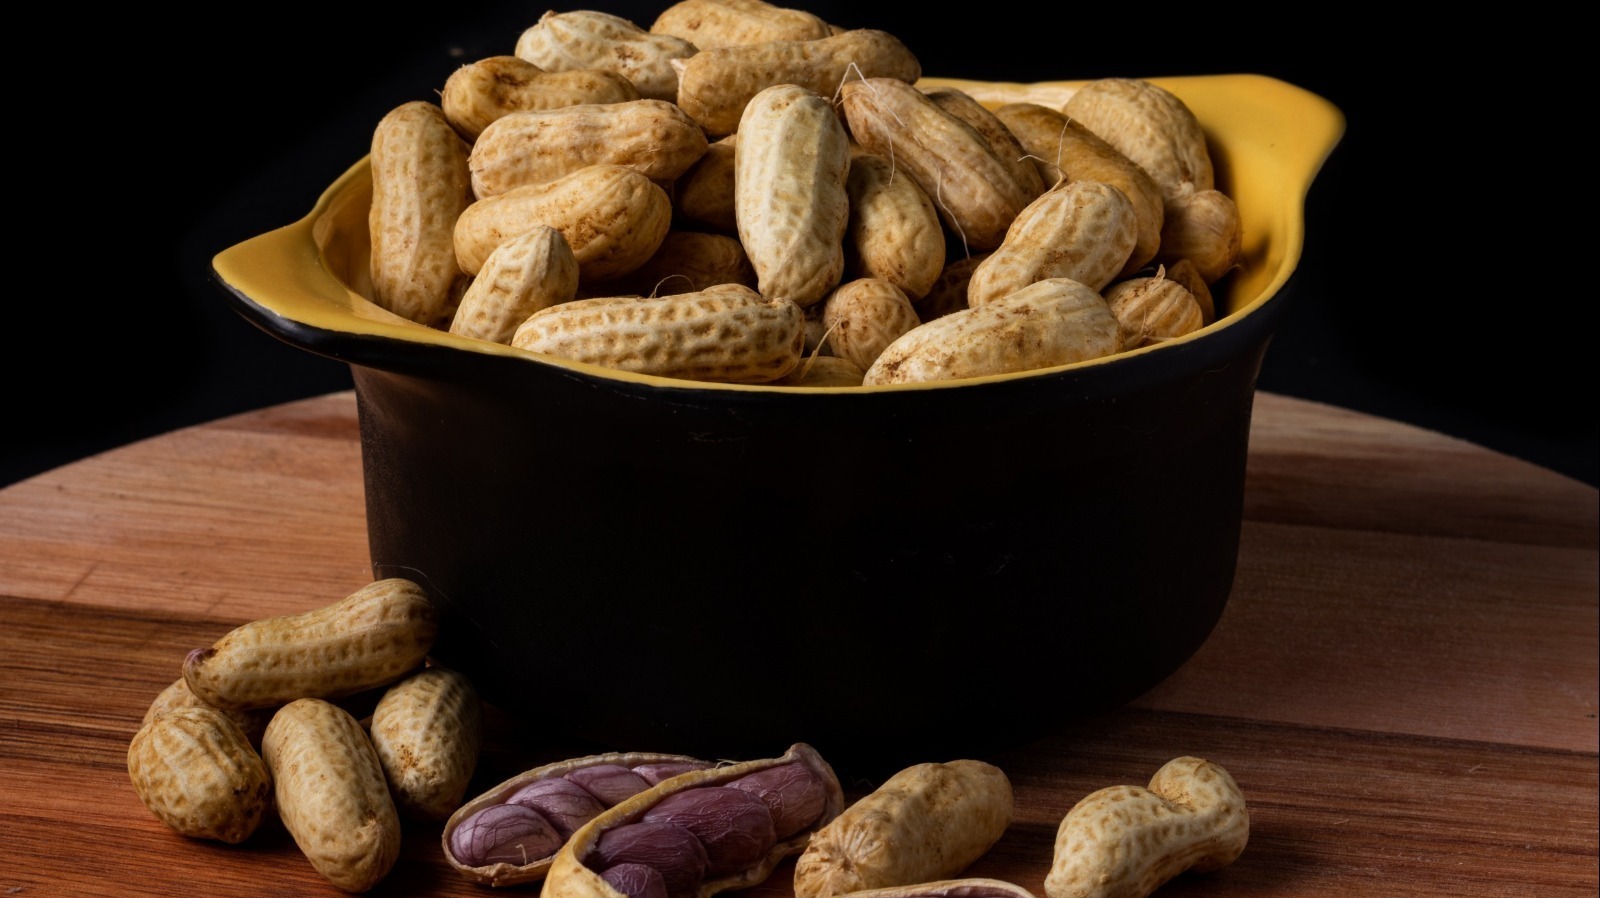 How To Store Boiled Peanuts After Cooking